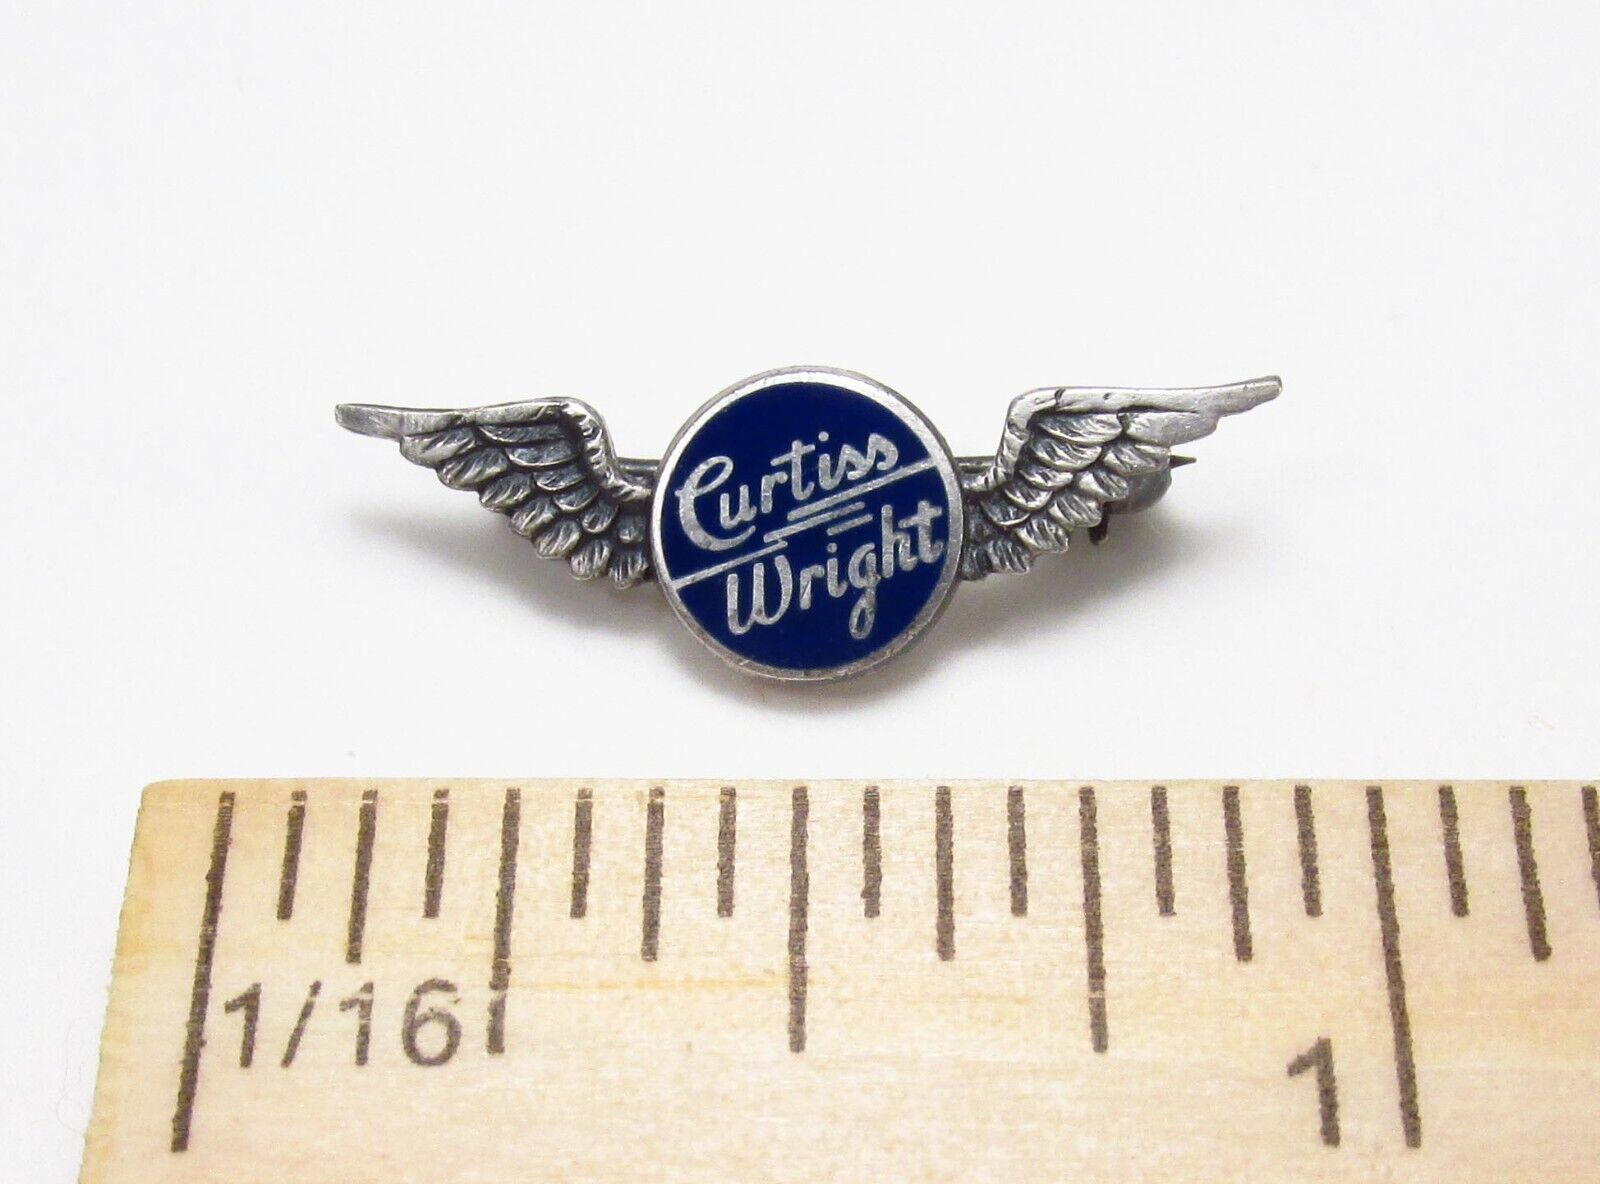 Vintage Curtiss Wright USA Sterling Silver Aviation Aerospace Service Award Pin